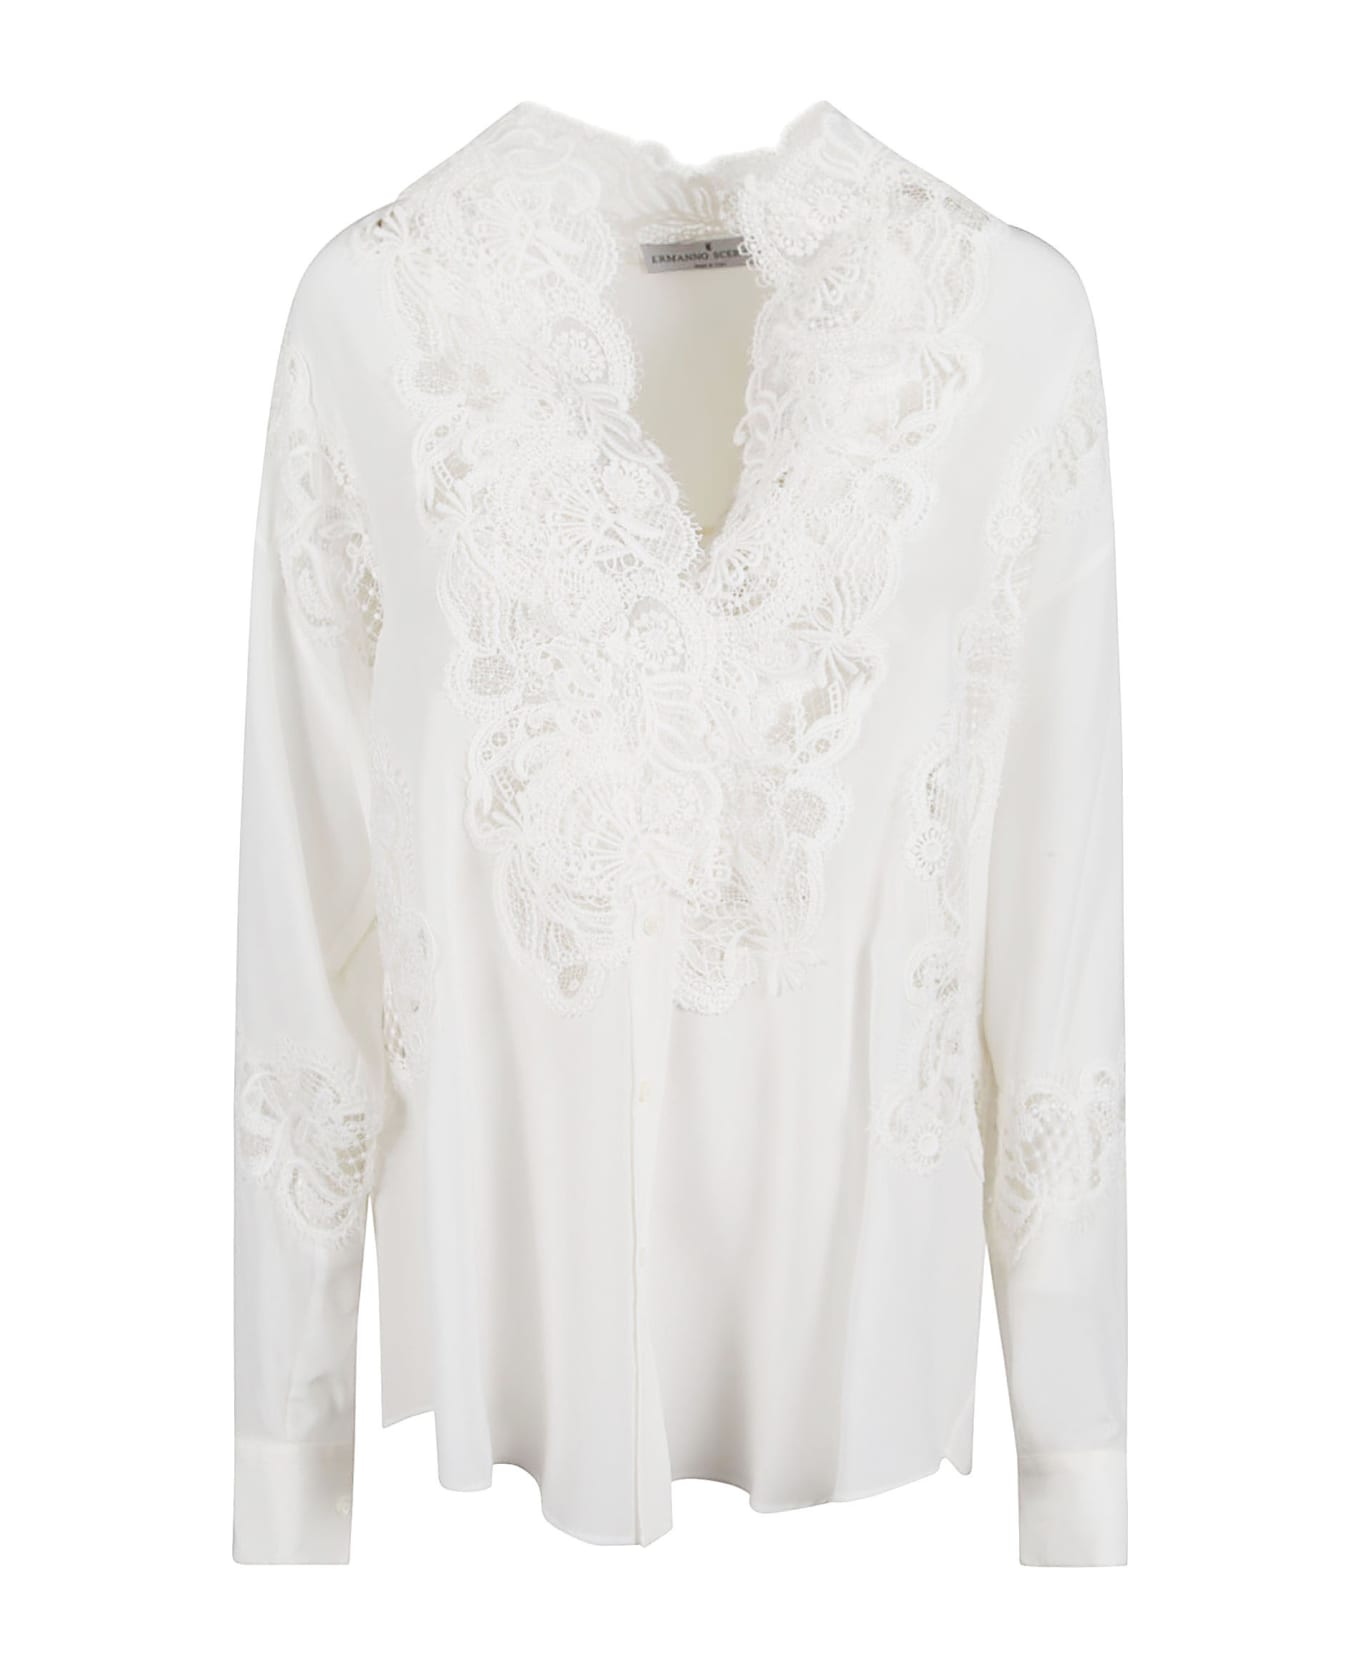 Ermanno Scervino Floral Blouse - White ブラウス